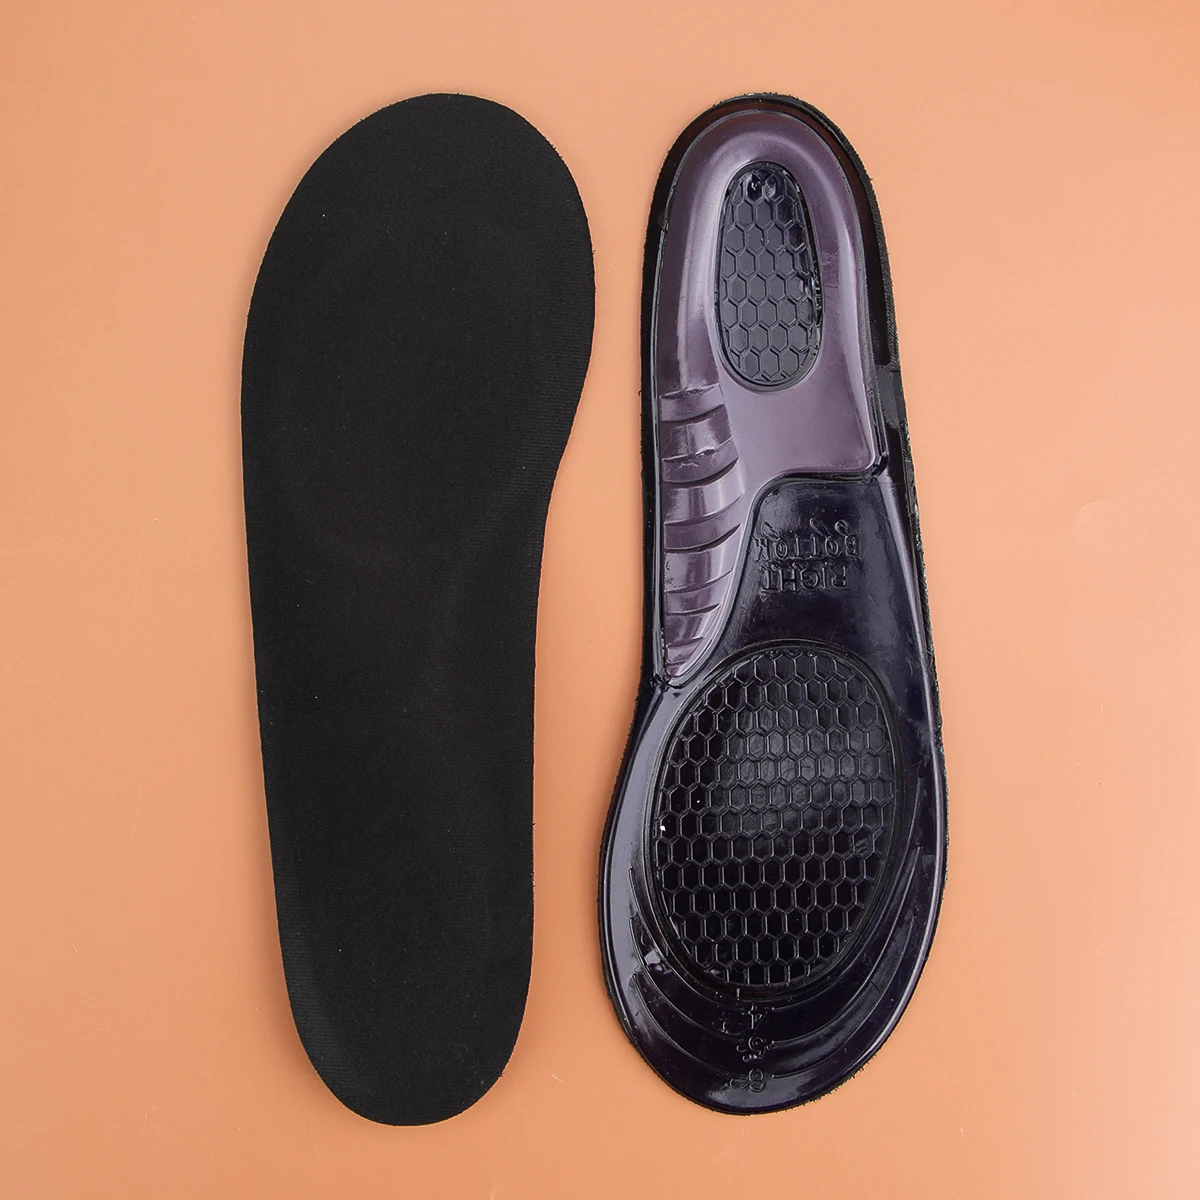 Silicone Insole Man Women High Elastic Insoles Orthotic Arch Support Foot Pain Massage Silicone Gel Soft Sport Shoe Pad Inserts